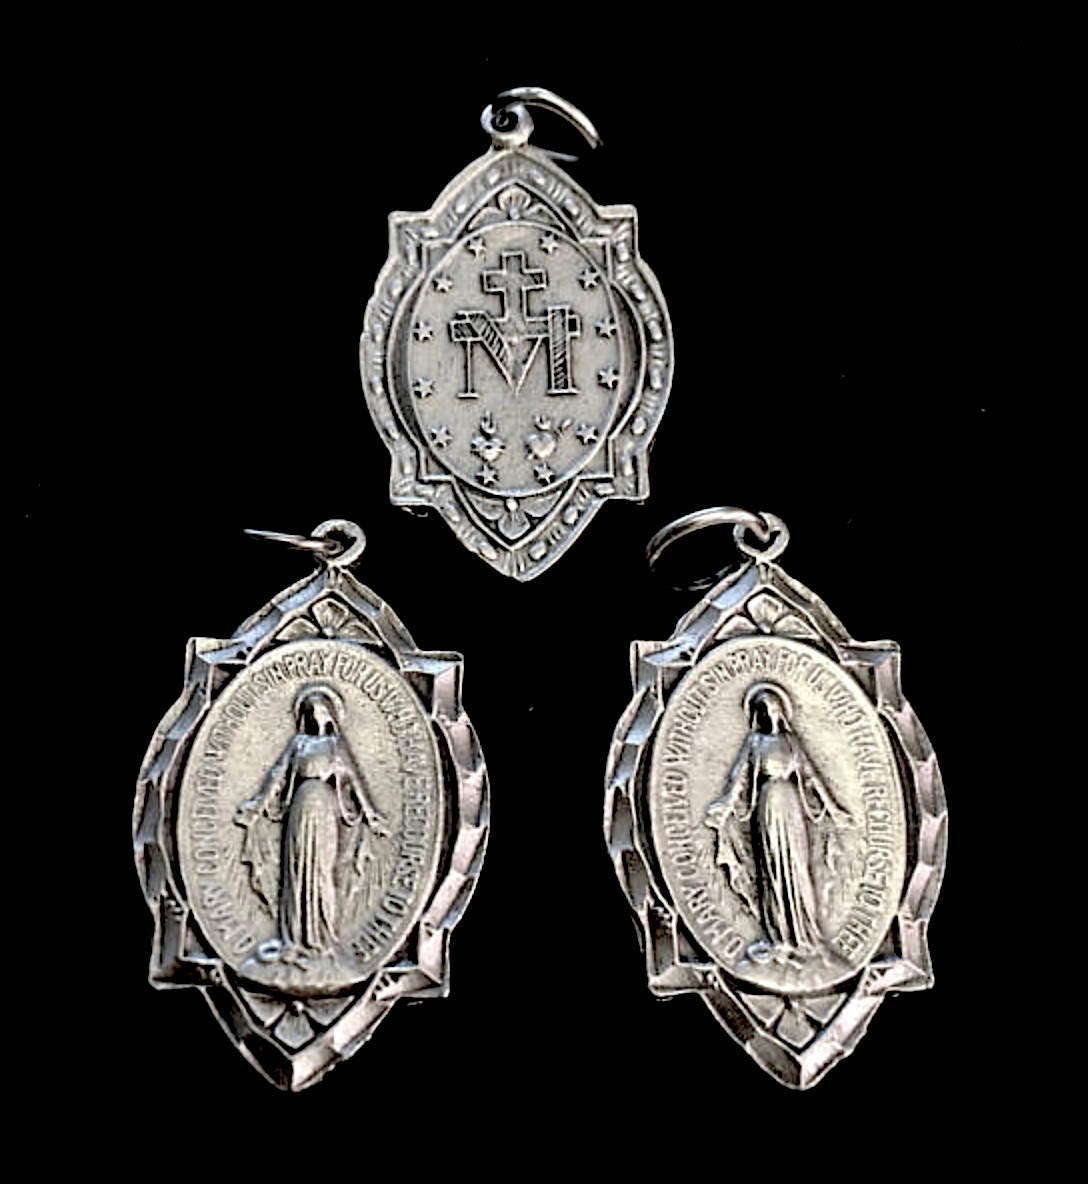 Set of 2 Miraculous Medals Virgin Mary Medal From Italy Silver 